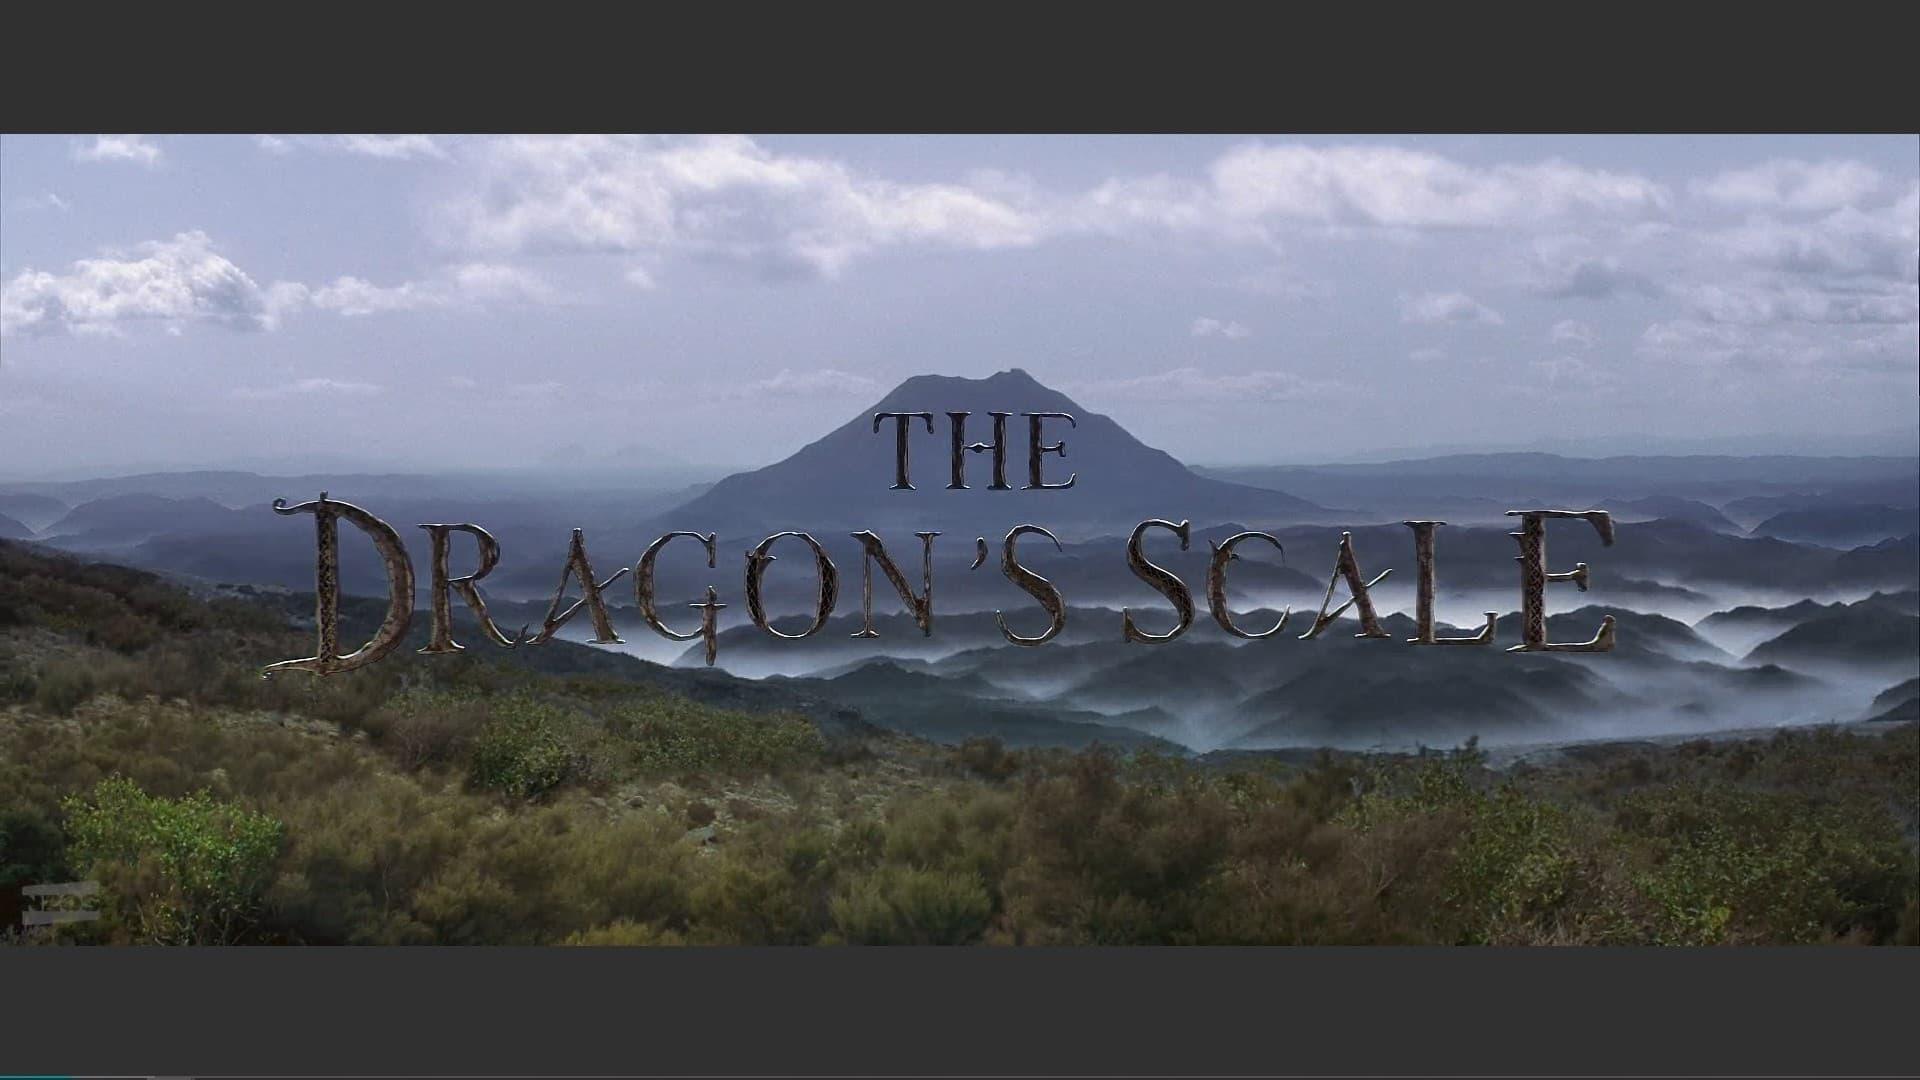 The Dragon's Scale backdrop